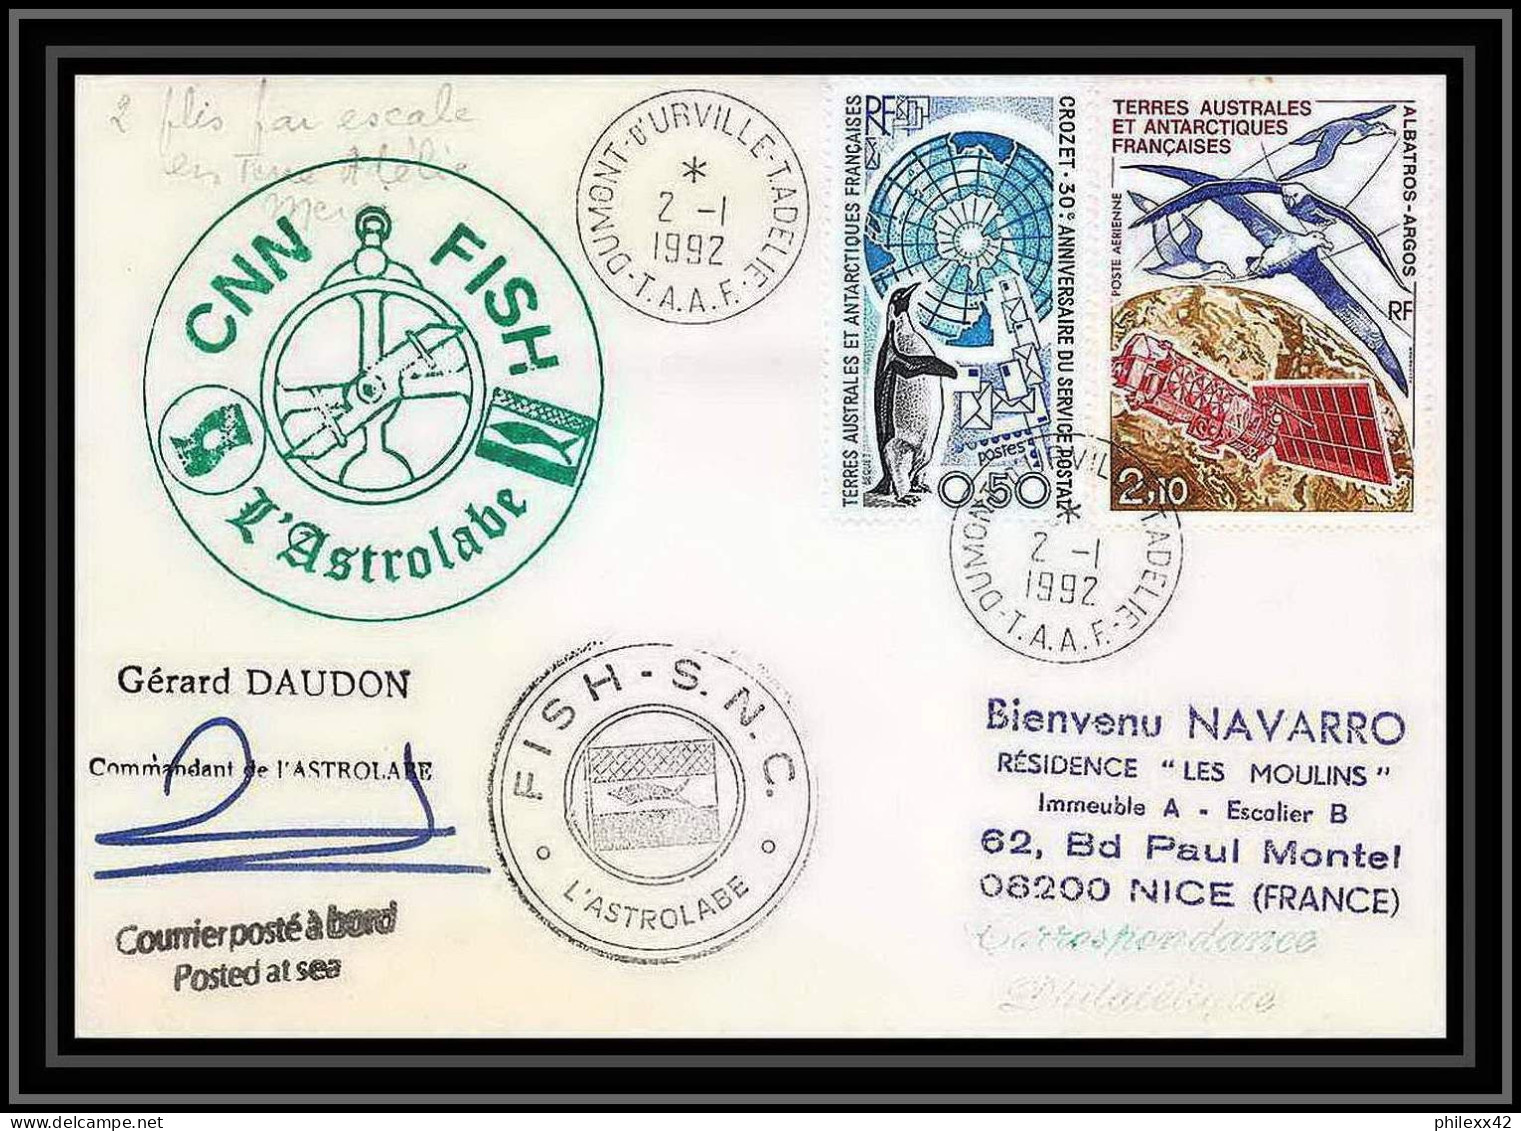 1806 Astrobale Signé Signed Daudon 2/1/1992 TAAF Antarctic Terres Australes Lettre (cover) - Antarctic Expeditions